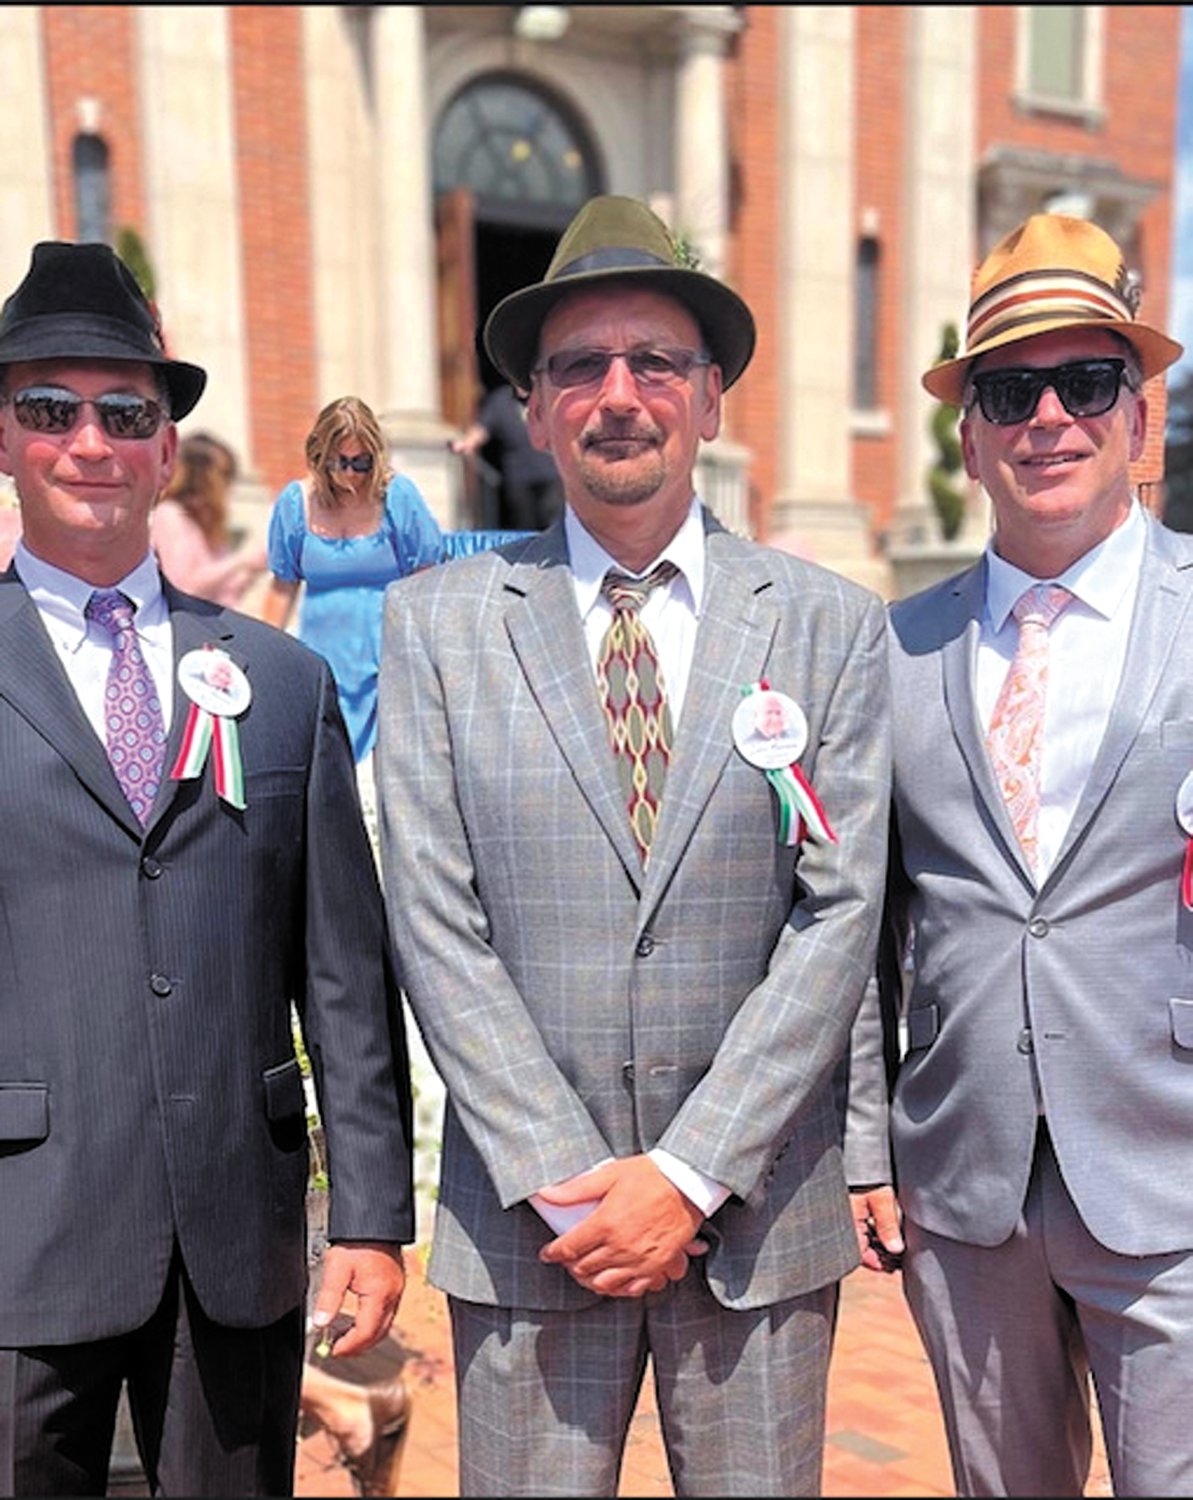 HONORING DAD: Lucio Mancini’s sons dressed up in suits and hats to honor their father who walked in the St. Mary’s Feast procession each year. (From left) Alberico Mancini, Danilo Mancini and Marco Mancini. (Submitted photo)